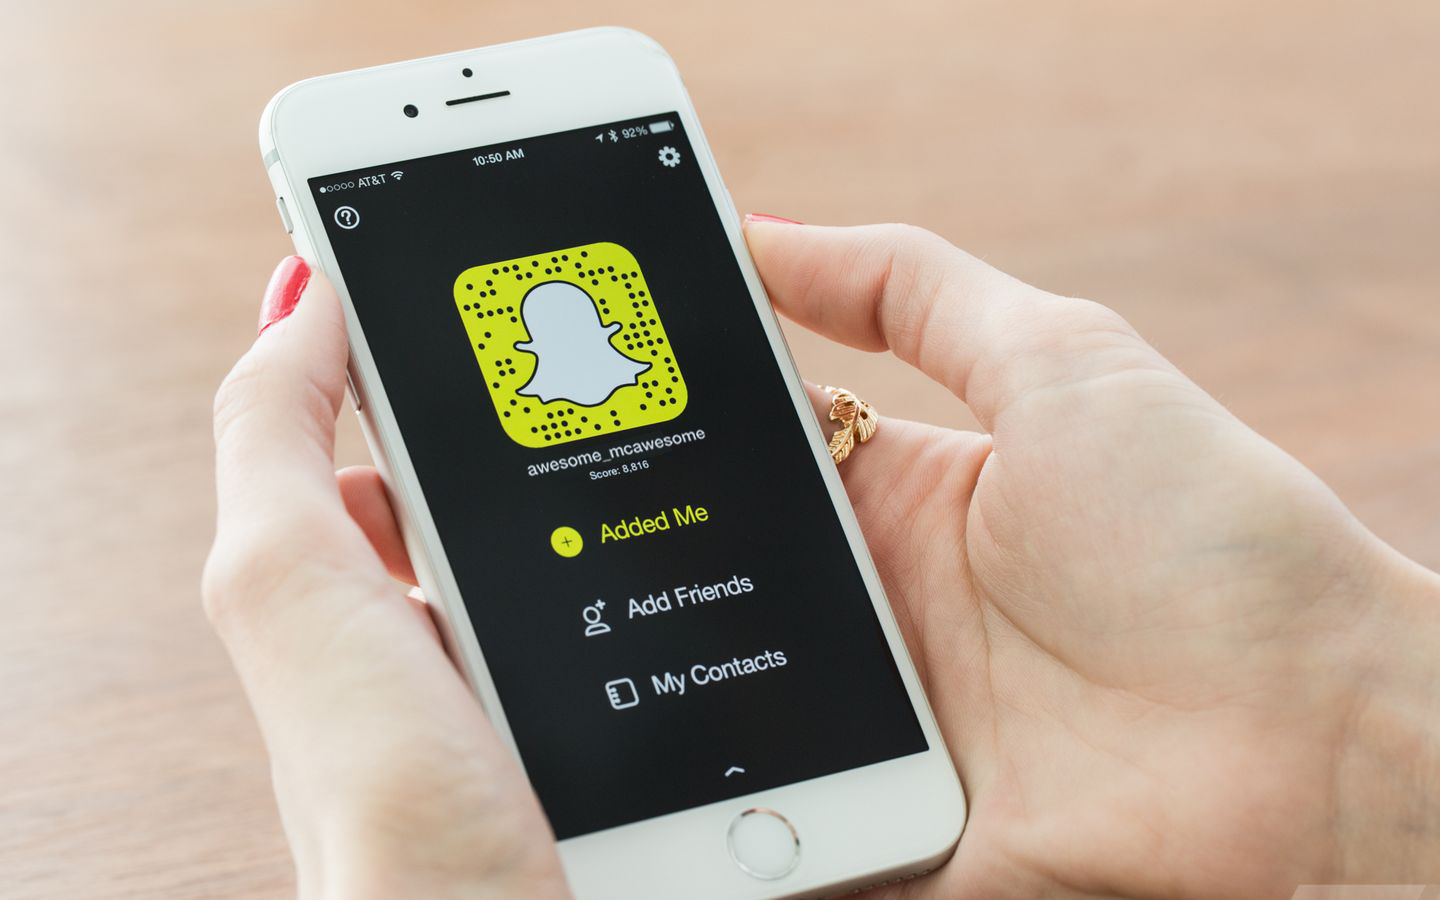 Get Snapchat Friends to Advertise Your Business